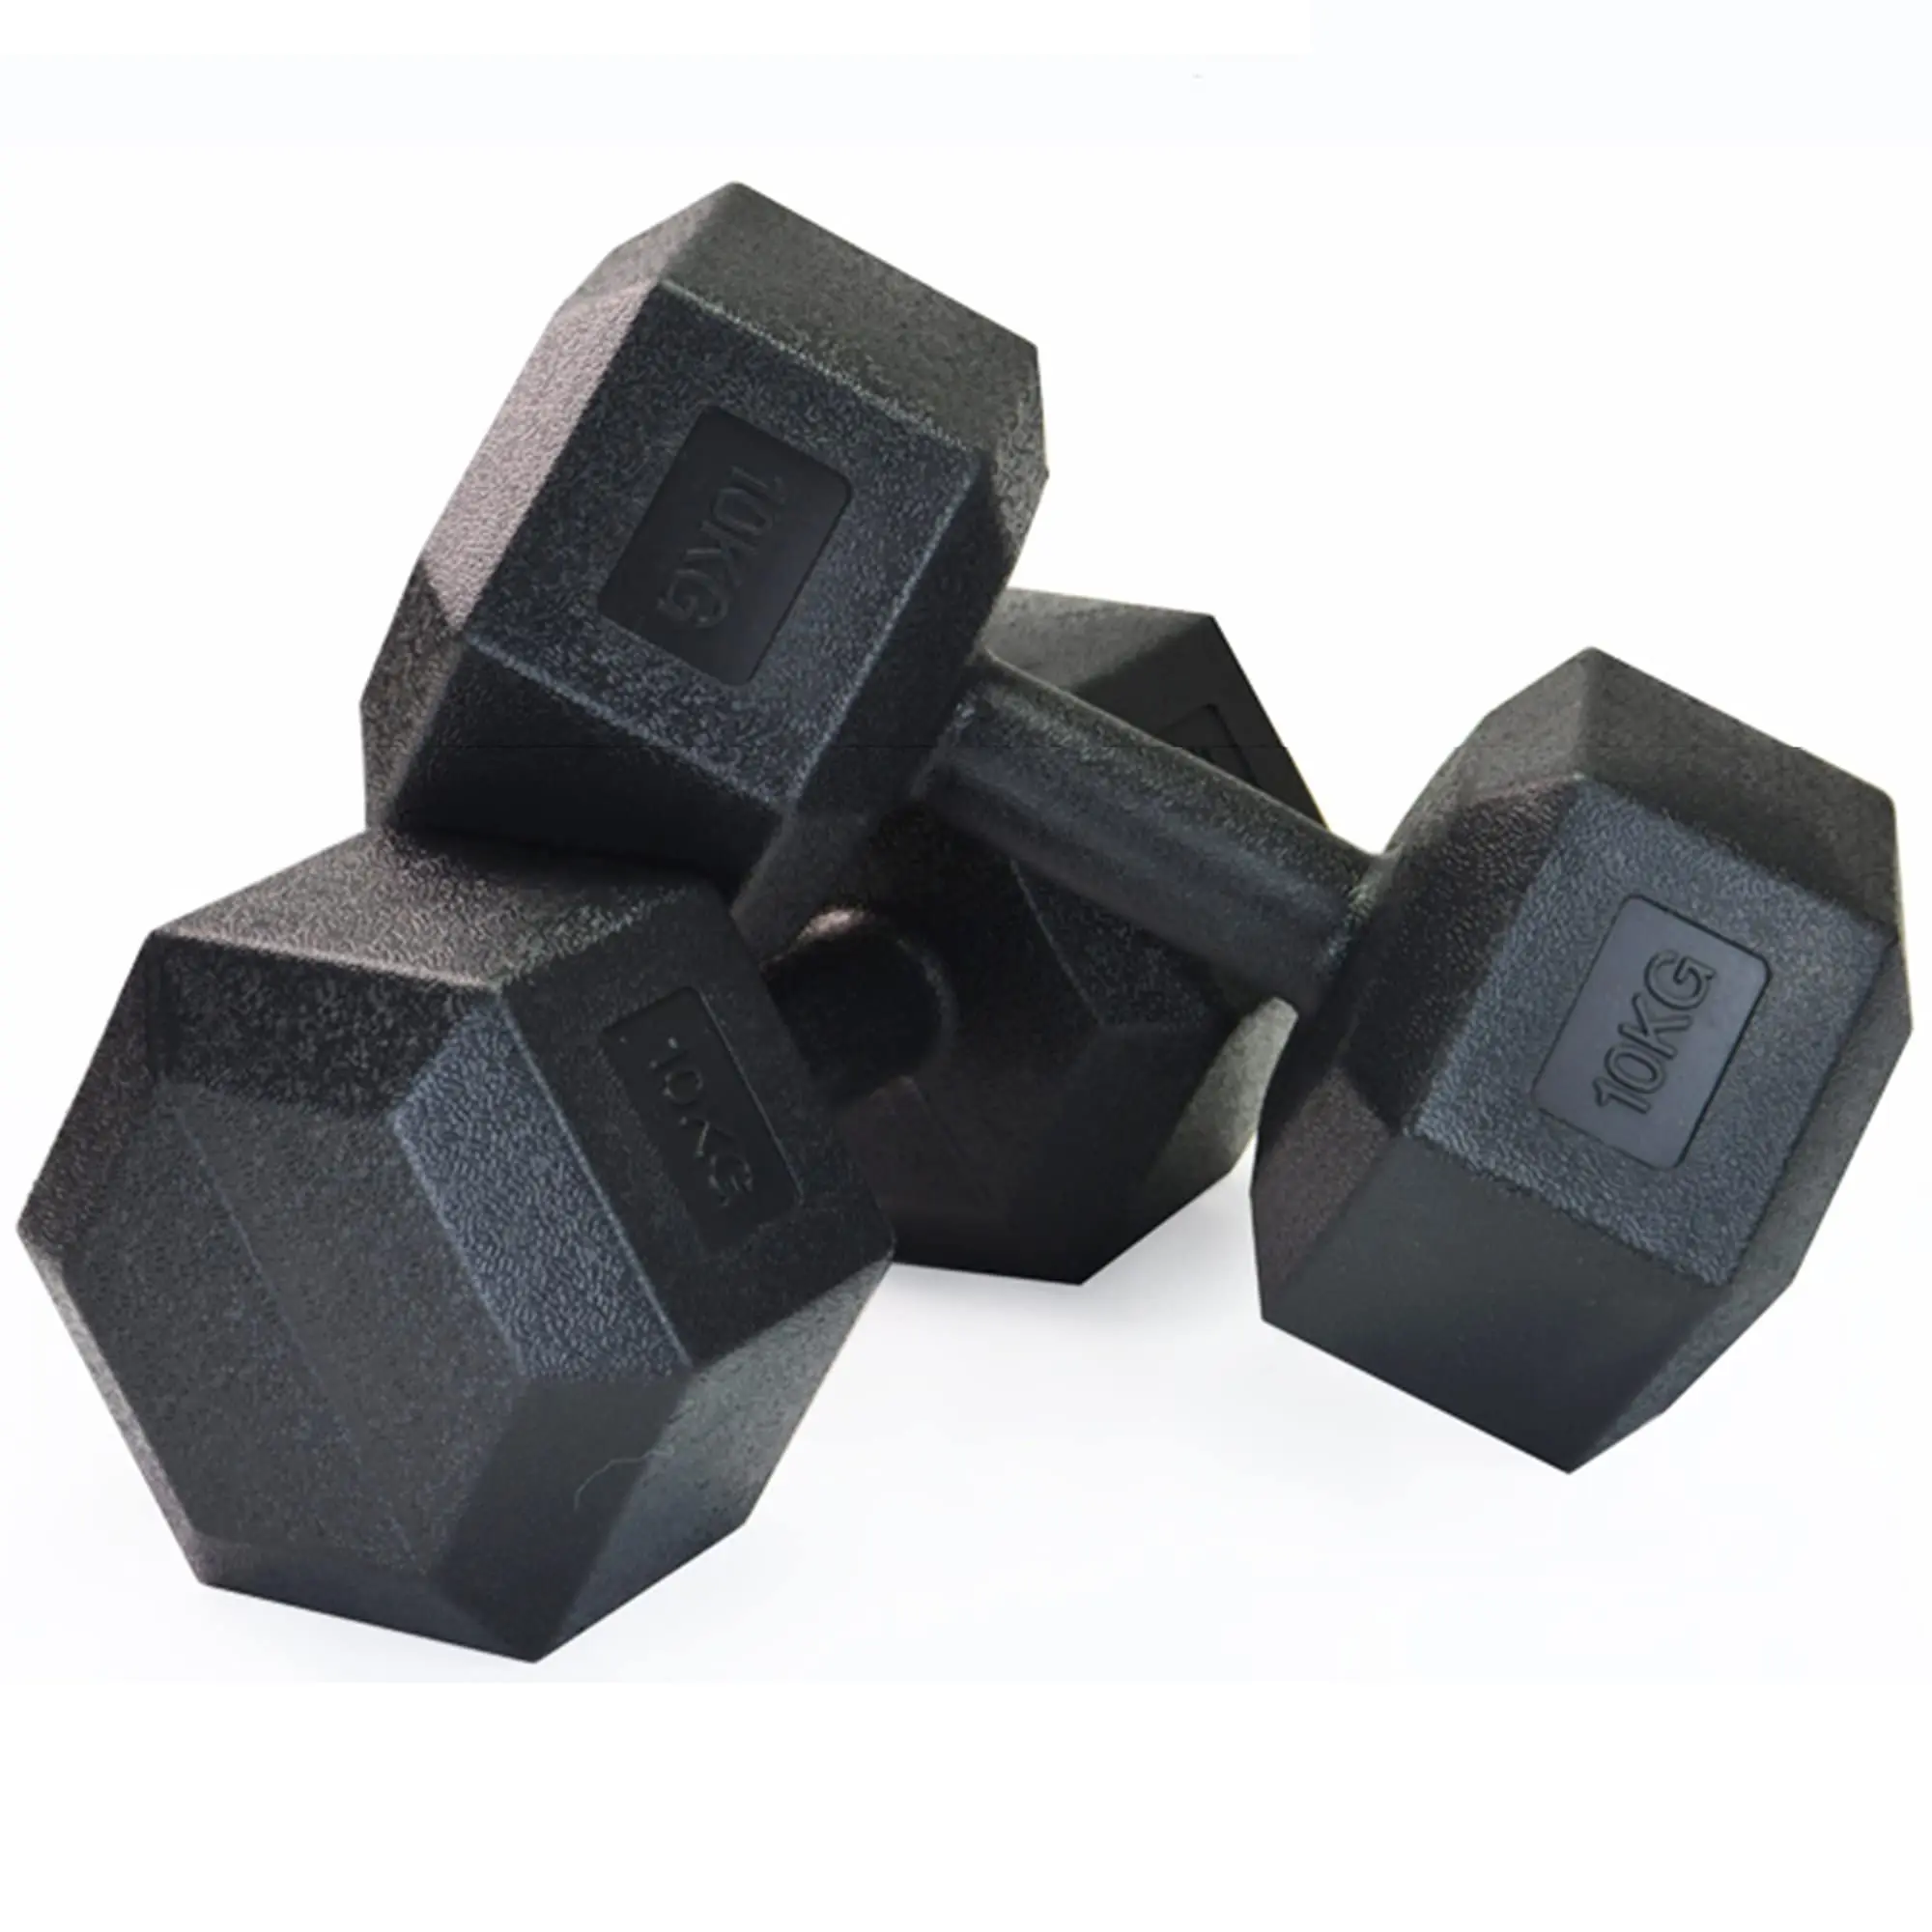 10 Kg /7.5Kg Cast Iron Hex Dumbbell, Set of 2 Fitness Equipment for Home Gym, Full Body Strength Training, Home Fitness, Weight Loss